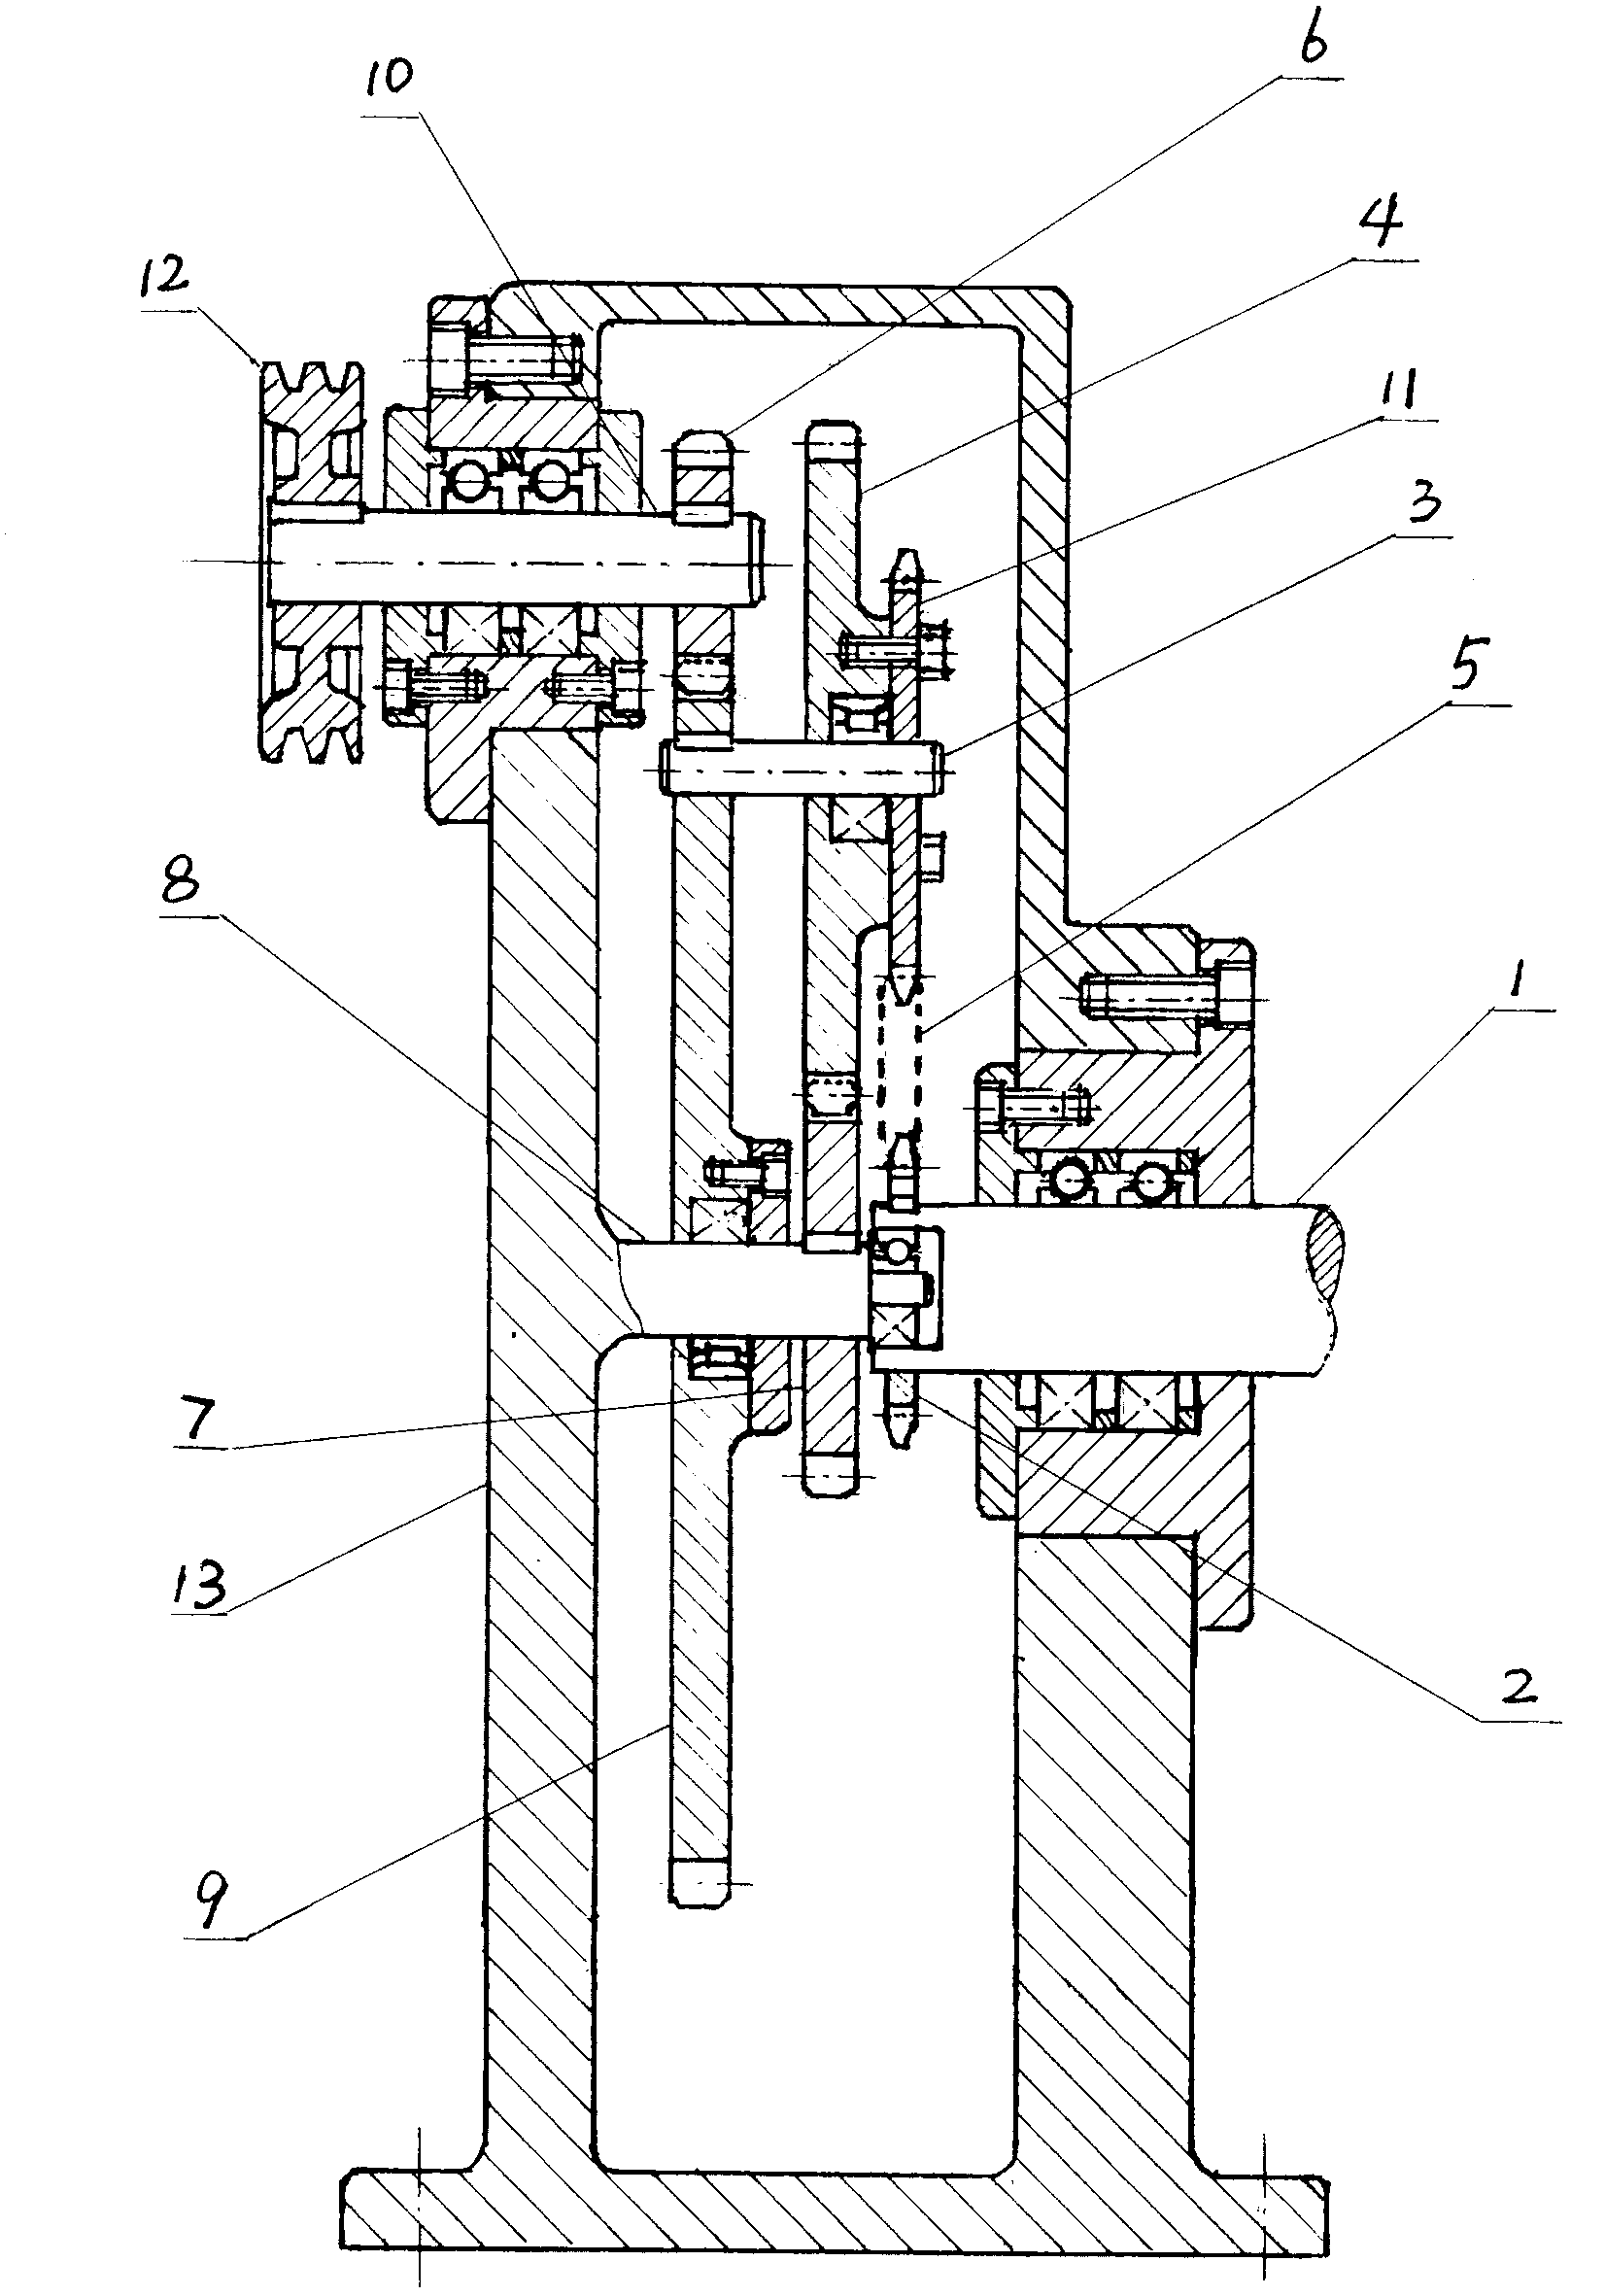 Mechanical transmission device capable of simultaneously increasing power and speed